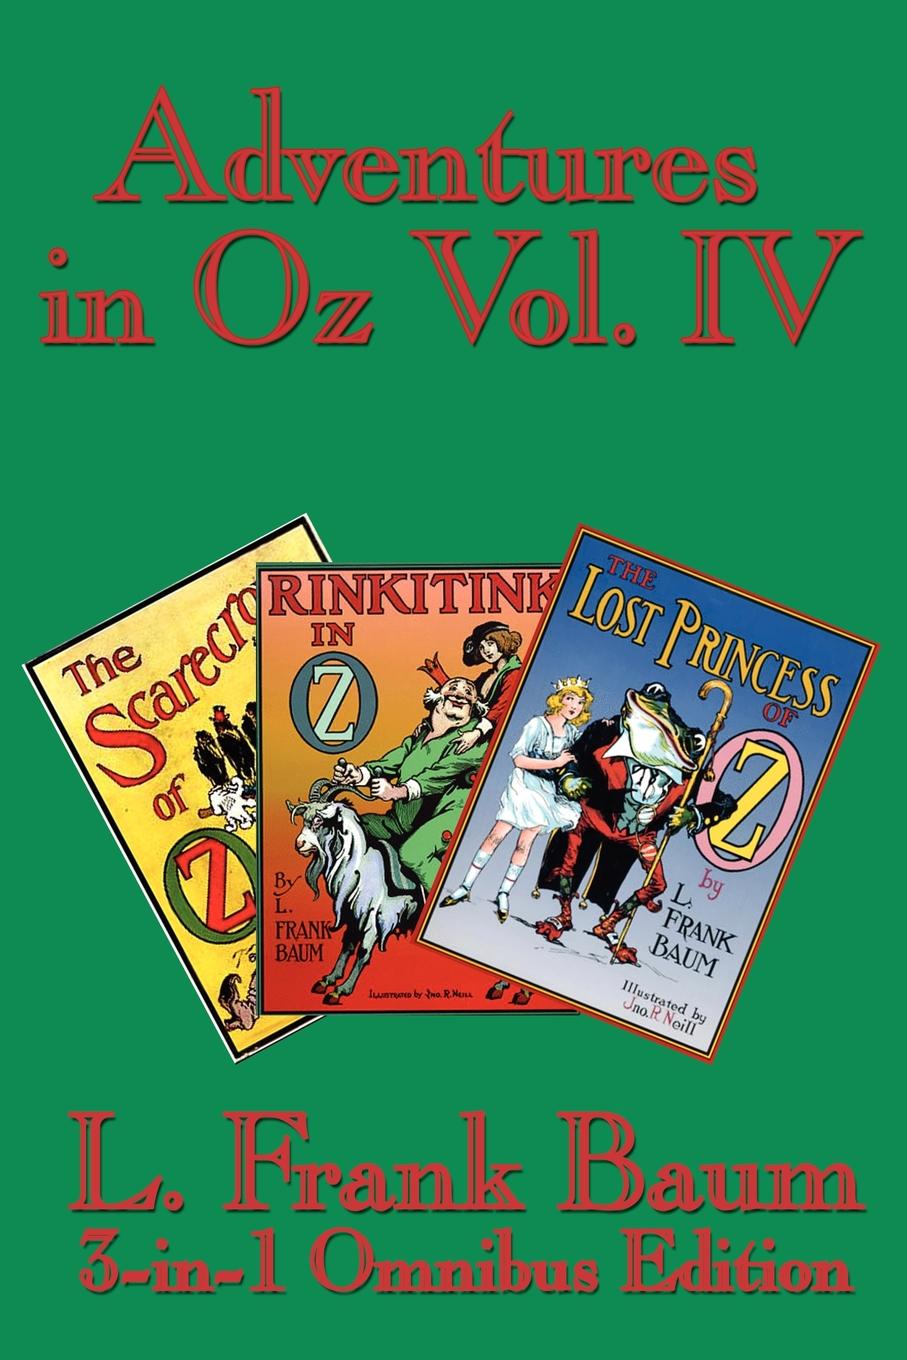 Adventures in Oz Vol. IV. The Scarecrow of Oz, Rinkitink in Oz, the Lost Princess of Oz